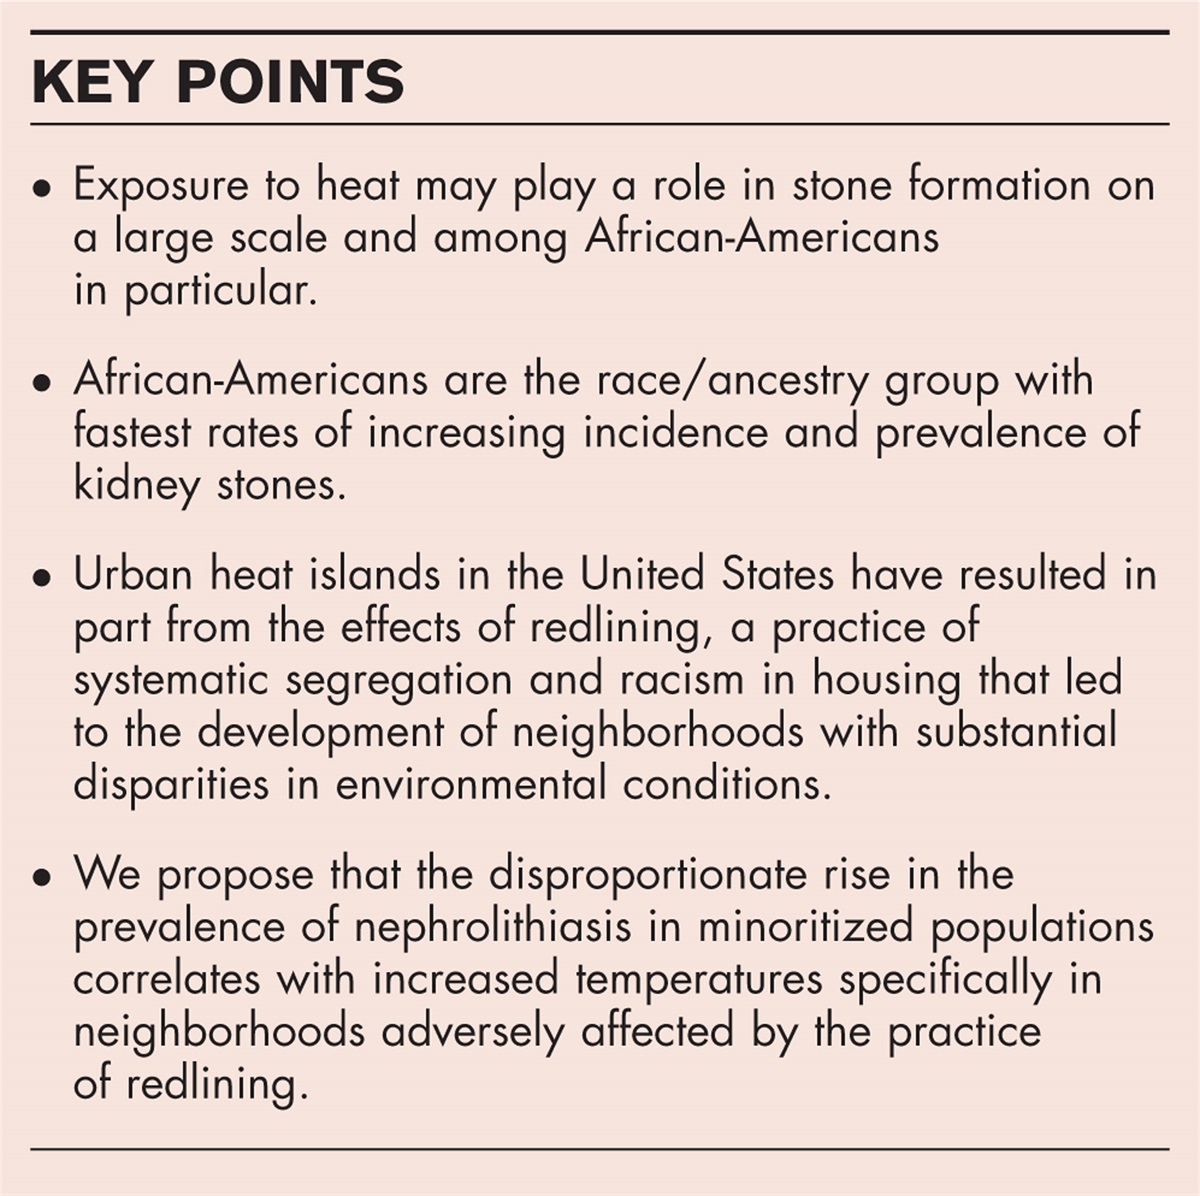 Redlining has led to increasing rates of nephrolithiasis in minoritized populations: a hypothesis